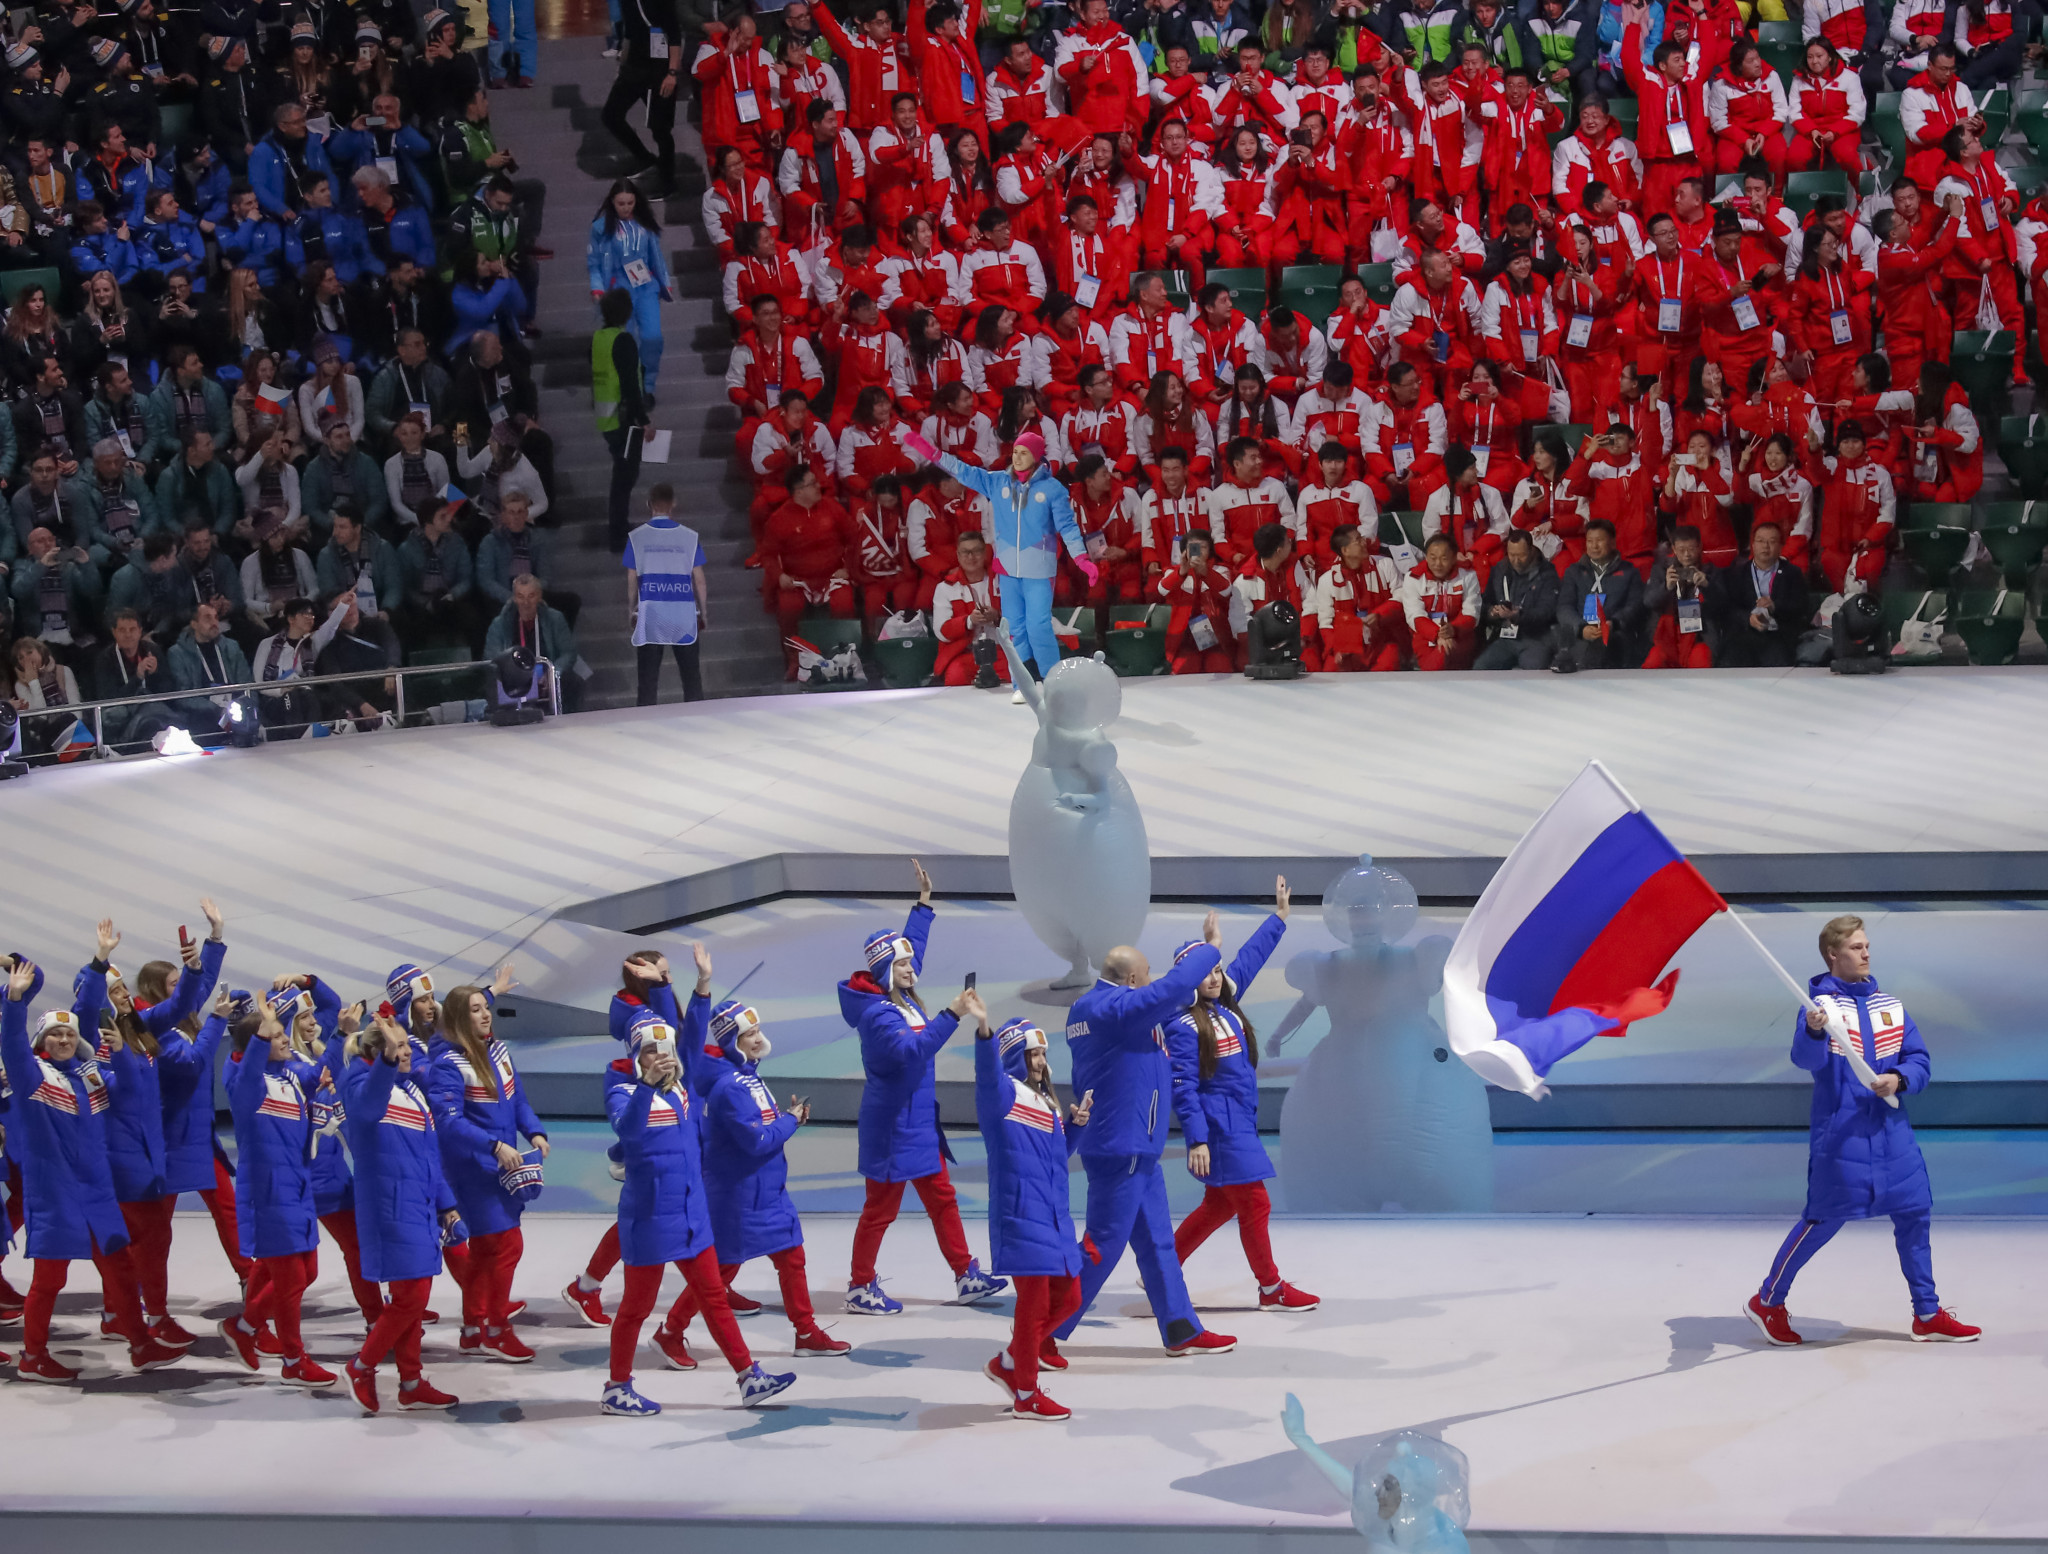 The awarding of the event provides immediate legacy for the Winter Universiade ©Getty Images